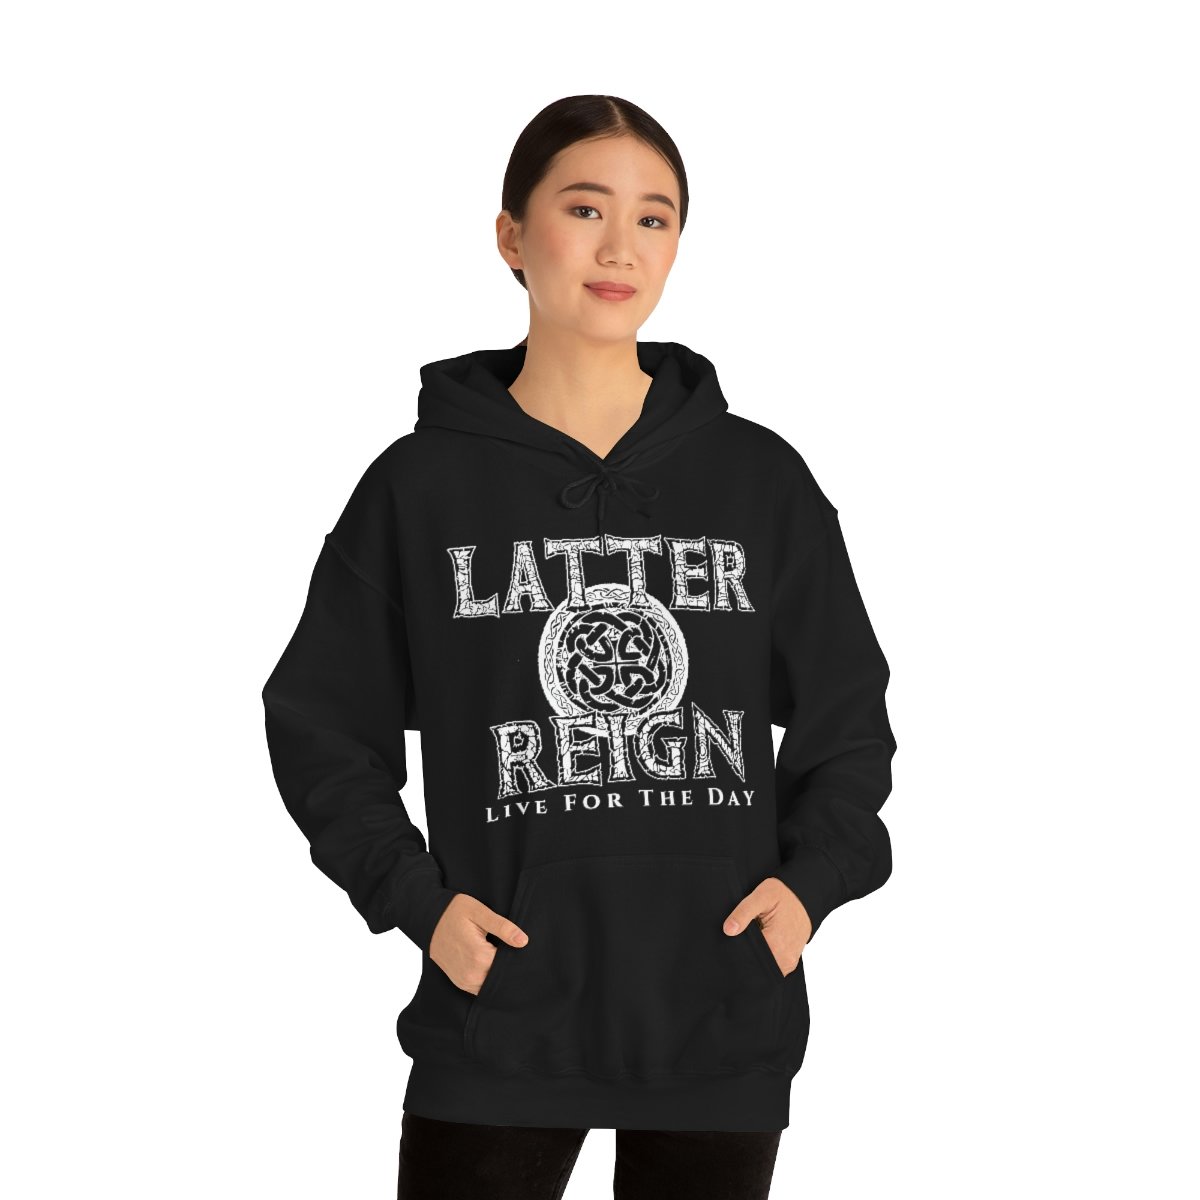 Latter Reign – Live For The Day Logo Pullover Hooded Sweatshirt